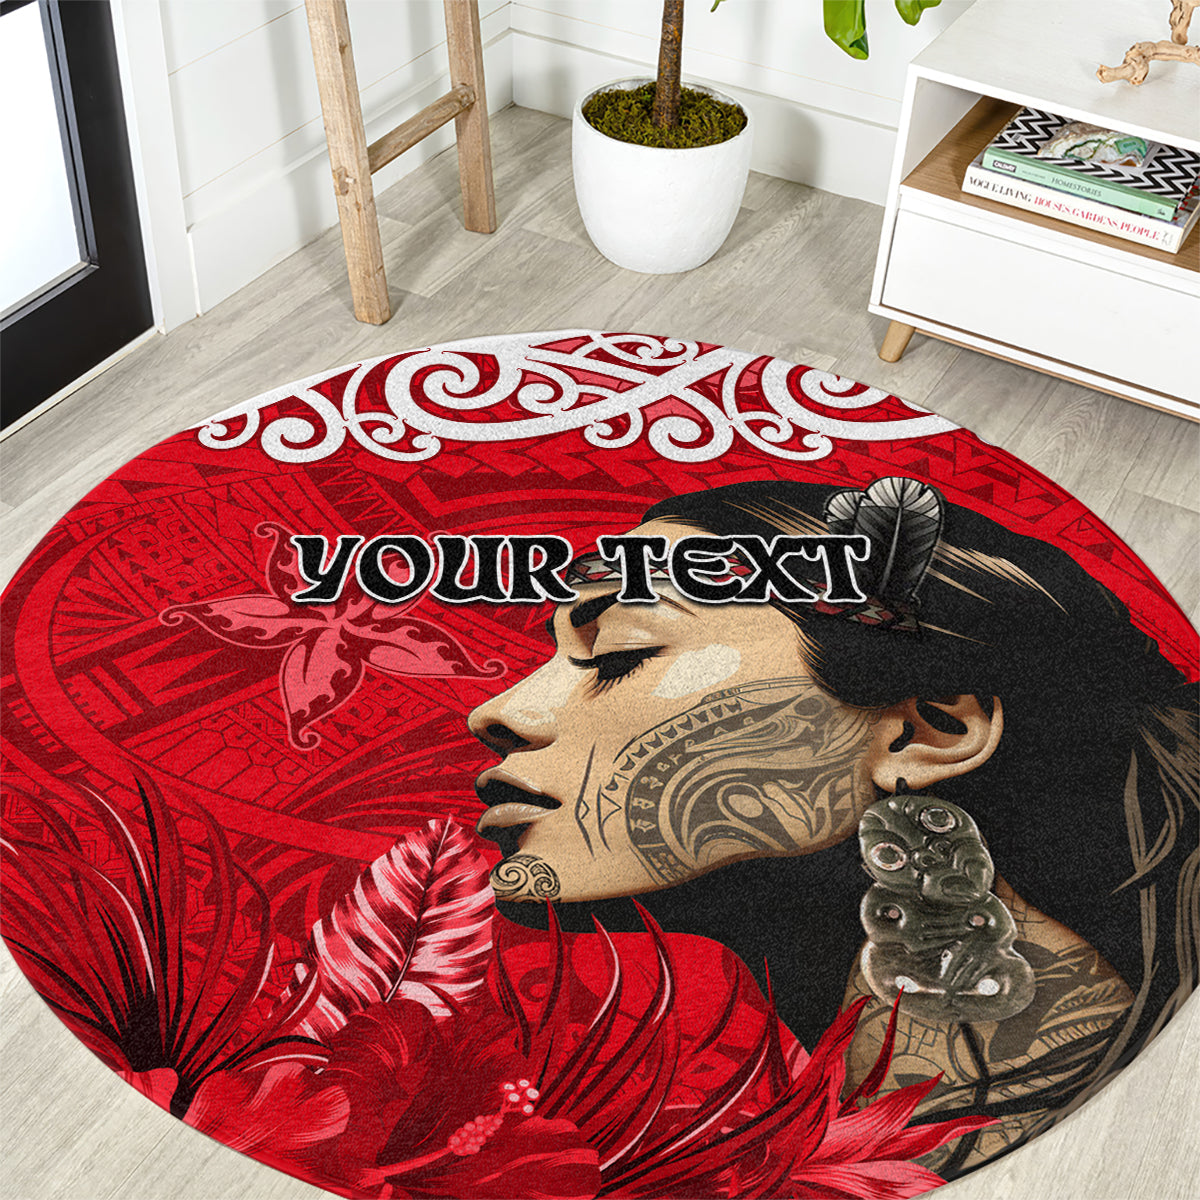 Custom New Zealand Womens Day Round Carpet Traditional Maori Woman Polynesian Pattern Red Color LT03 Red - Polynesian Pride